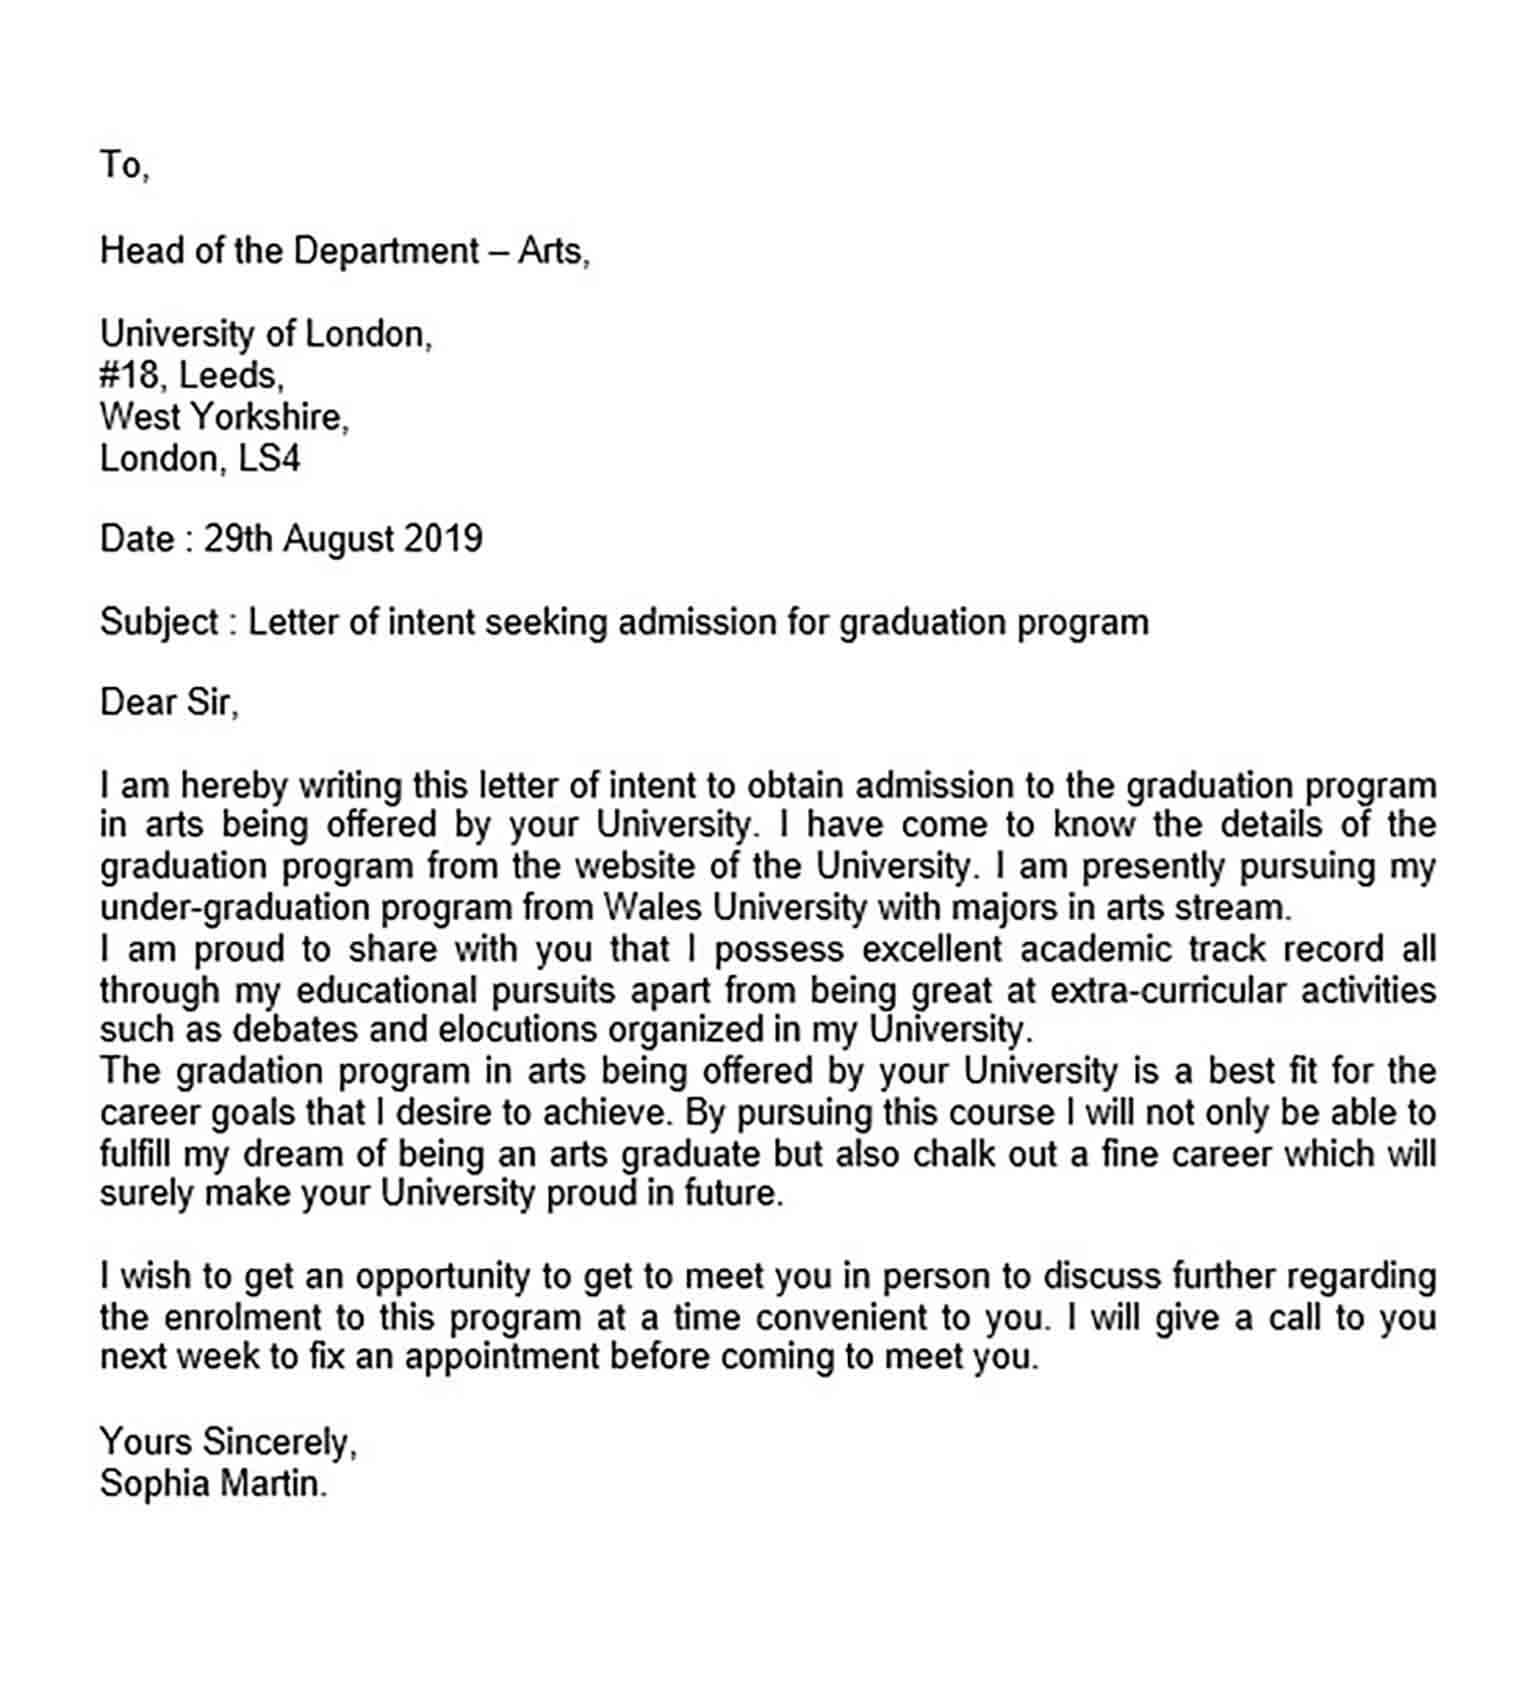 How to write a graduate school admissions letter